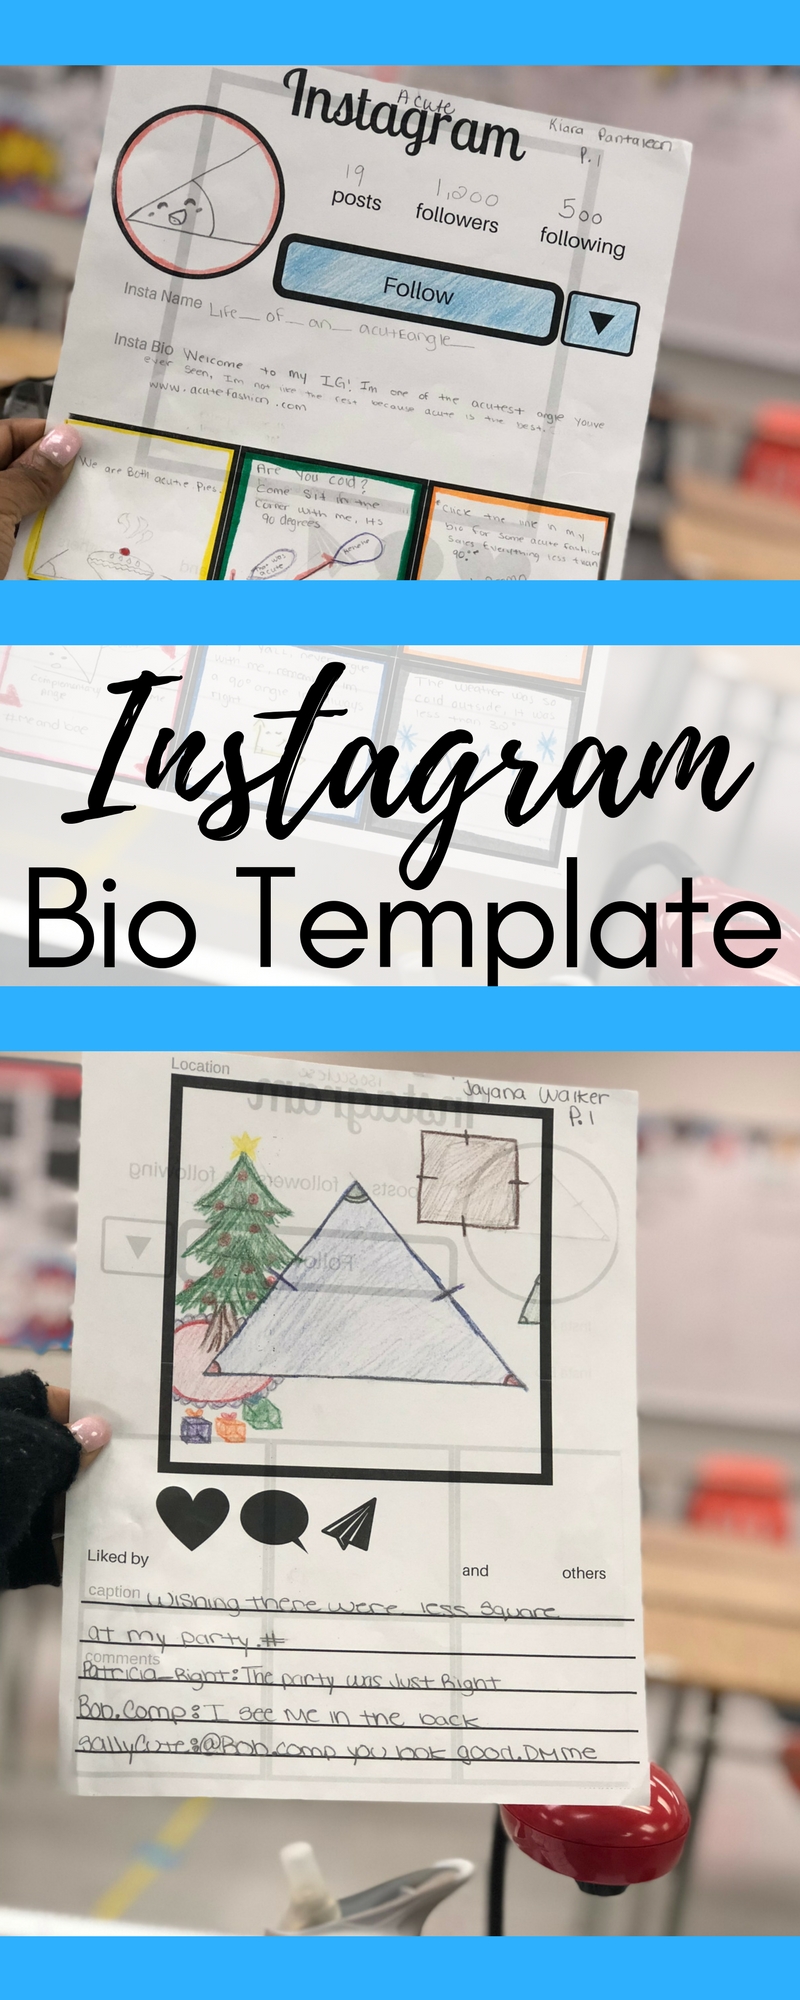 how-to-use-an-instagram-bio-template-in-math-esther-brunat